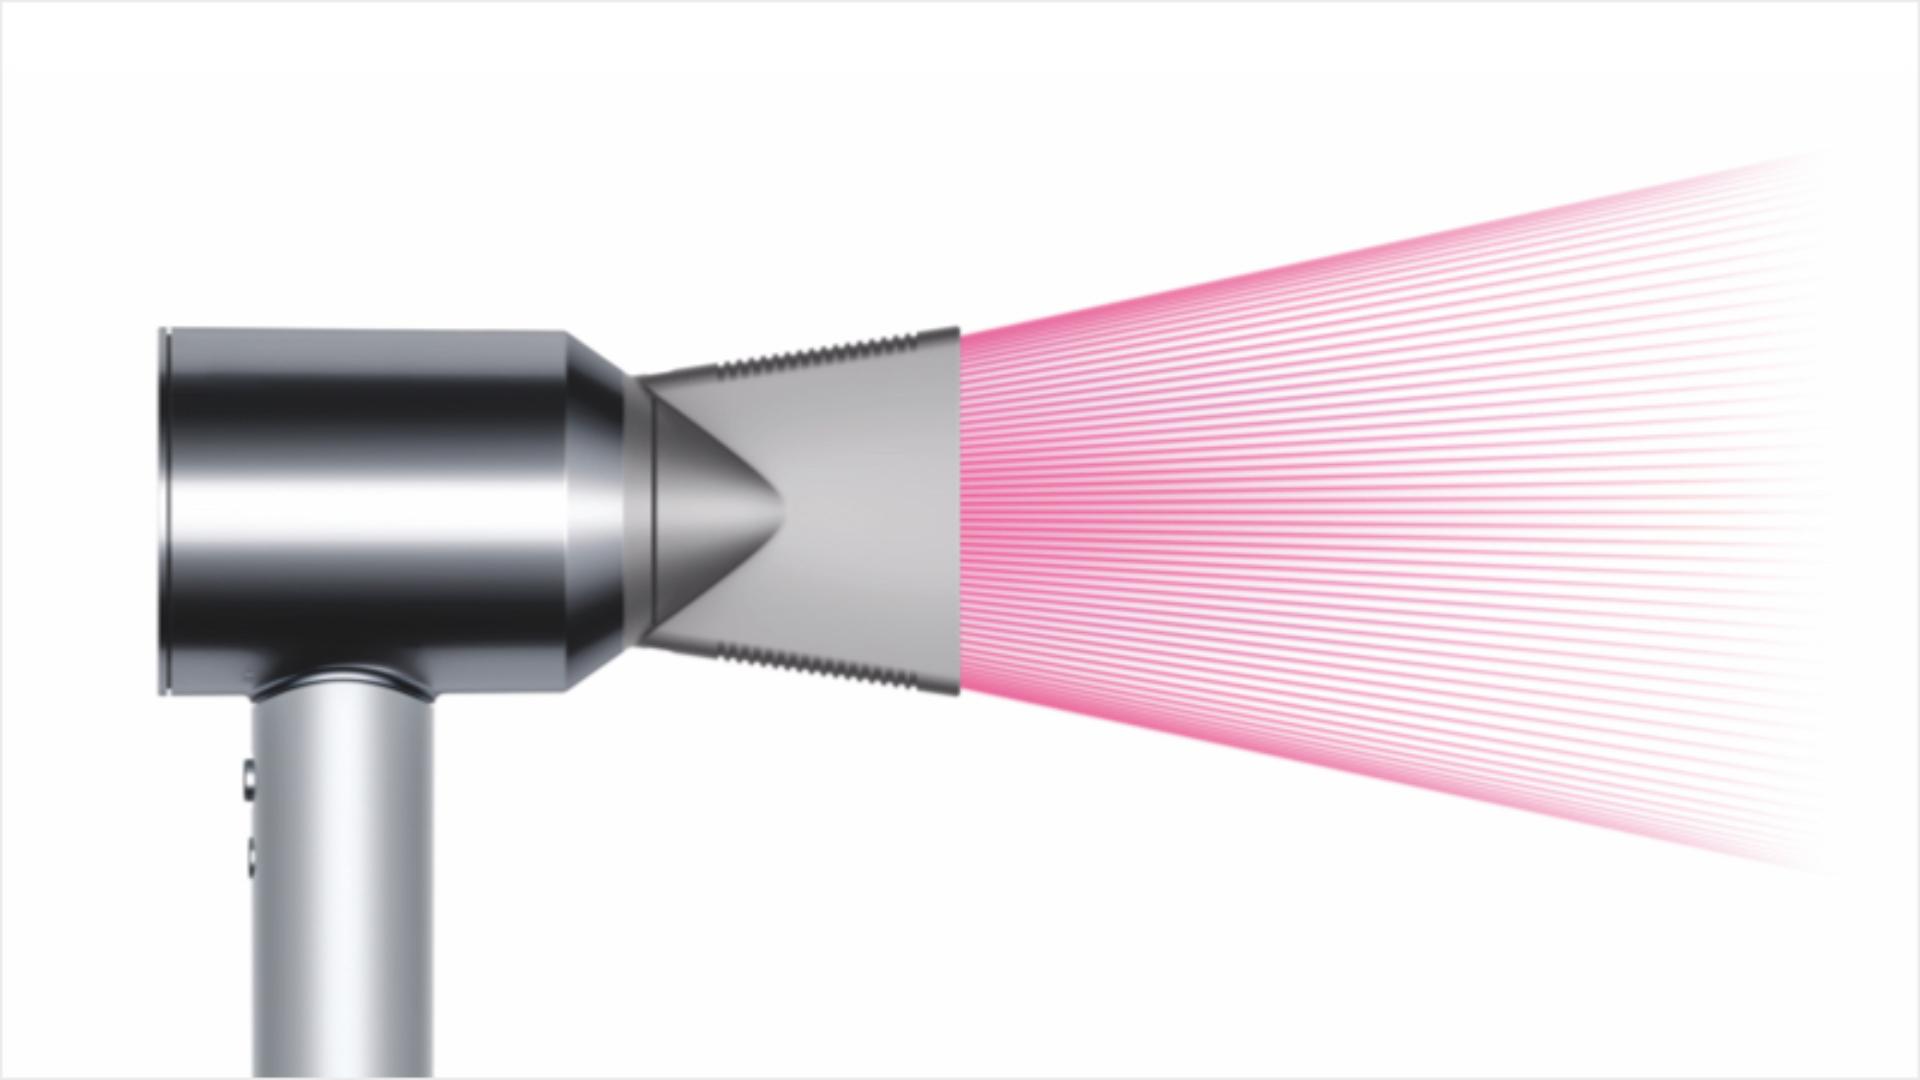 Professional concentrator attachment for the Dyson Supersonic hair dryer